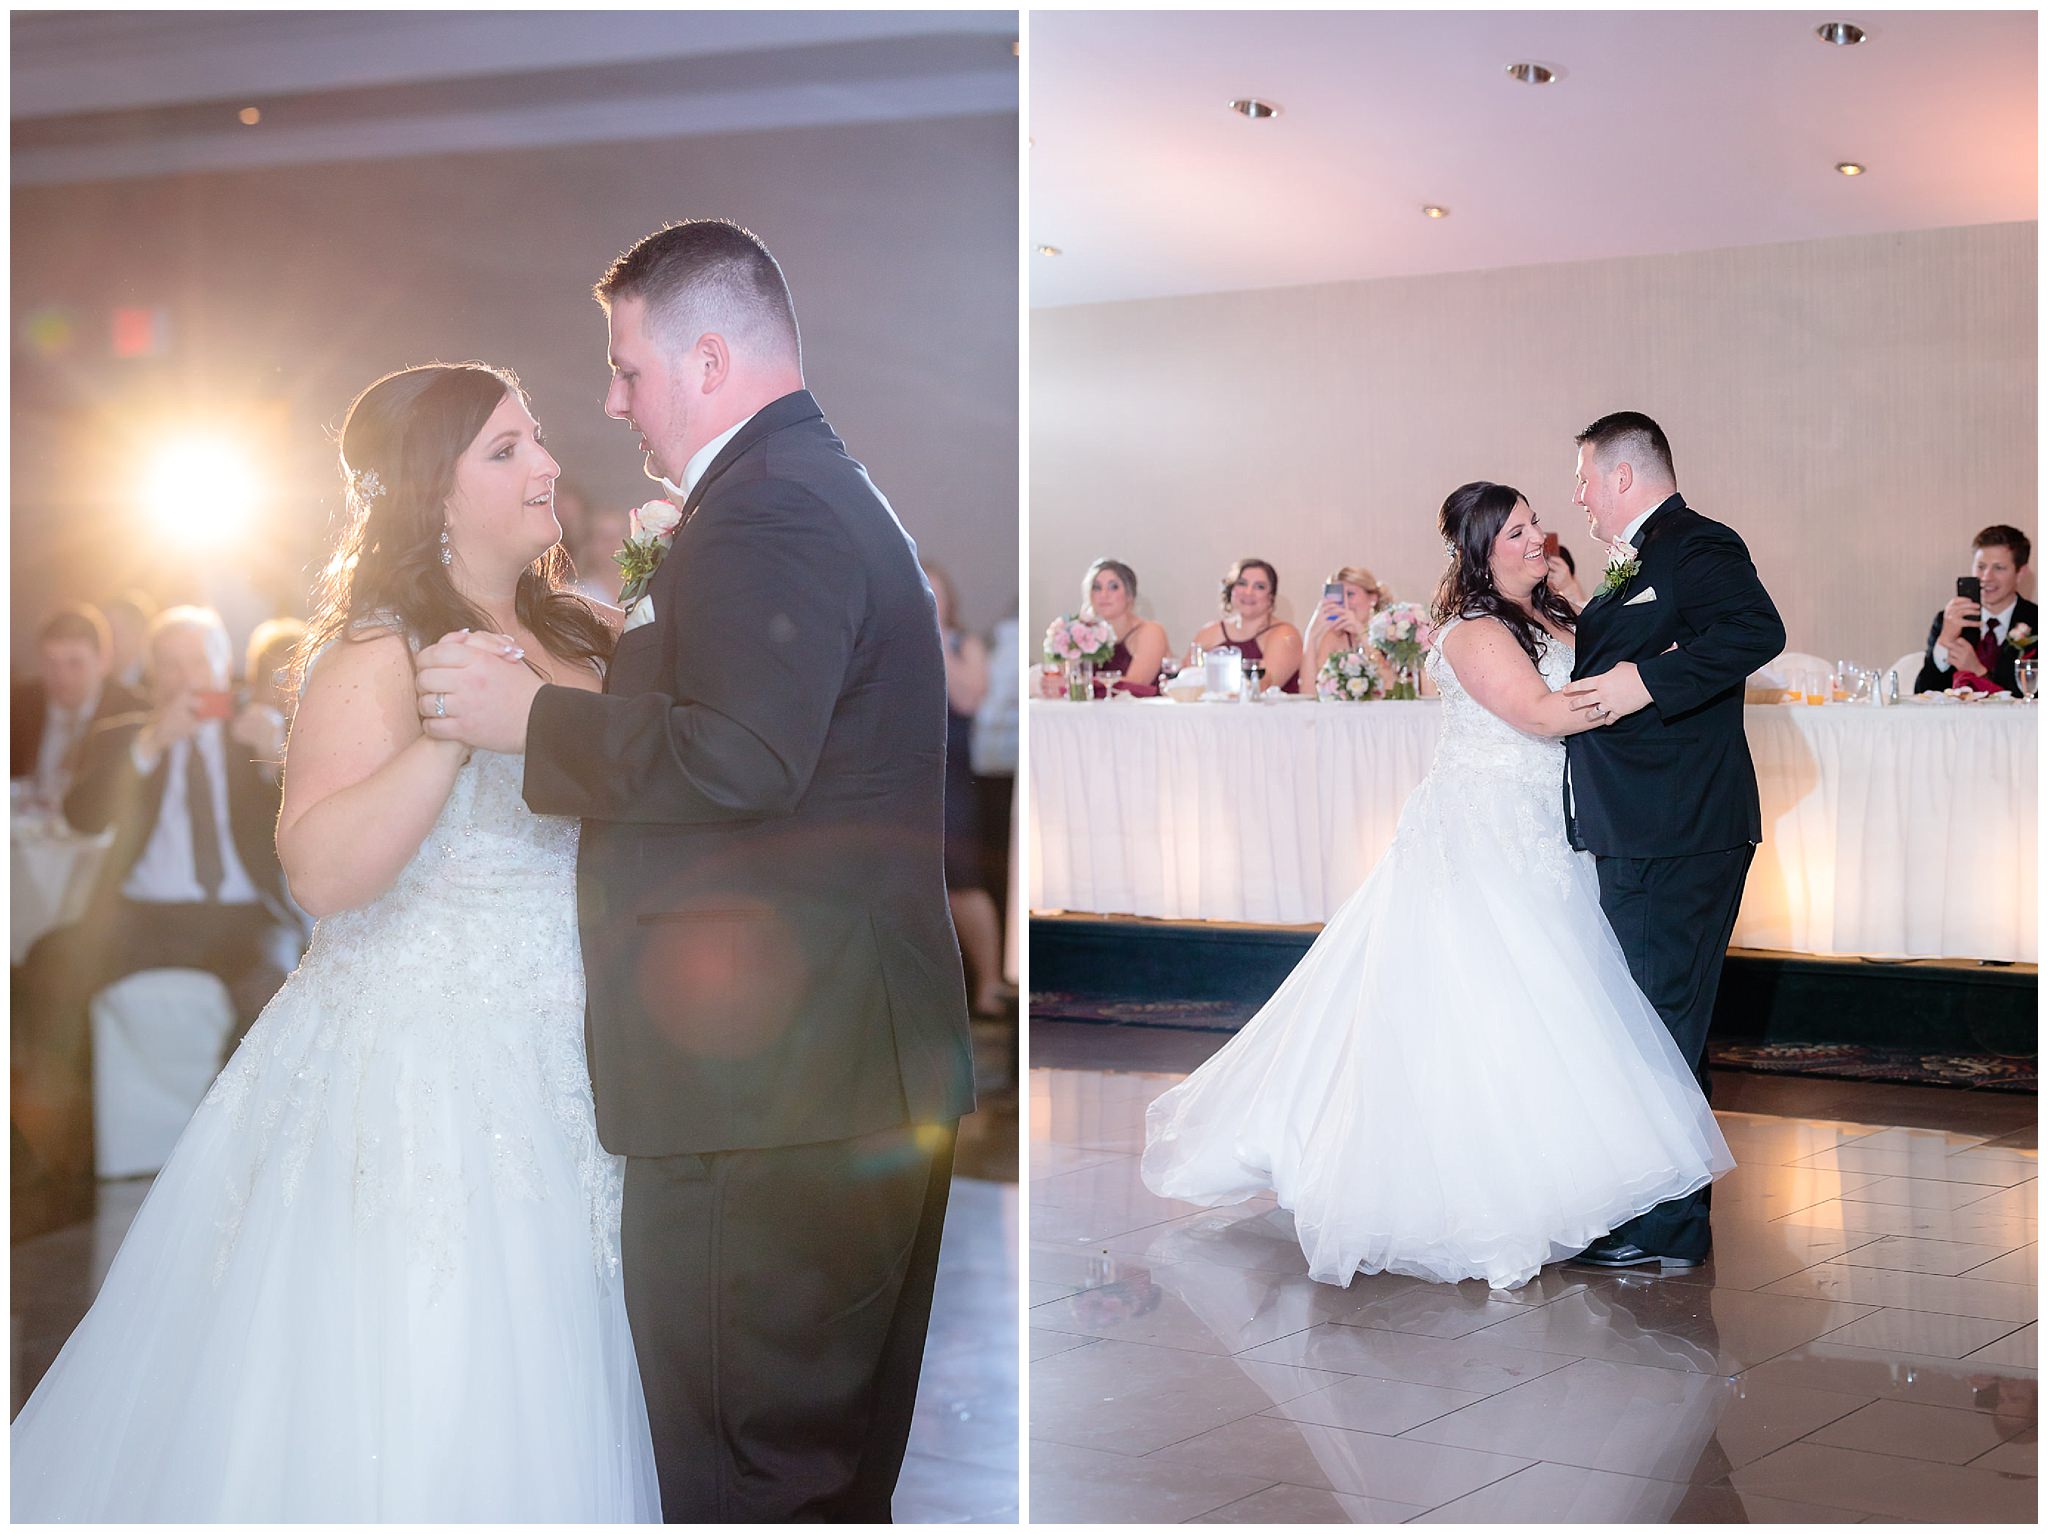 Bride & groom's first dance at their wedding reception at the Fez